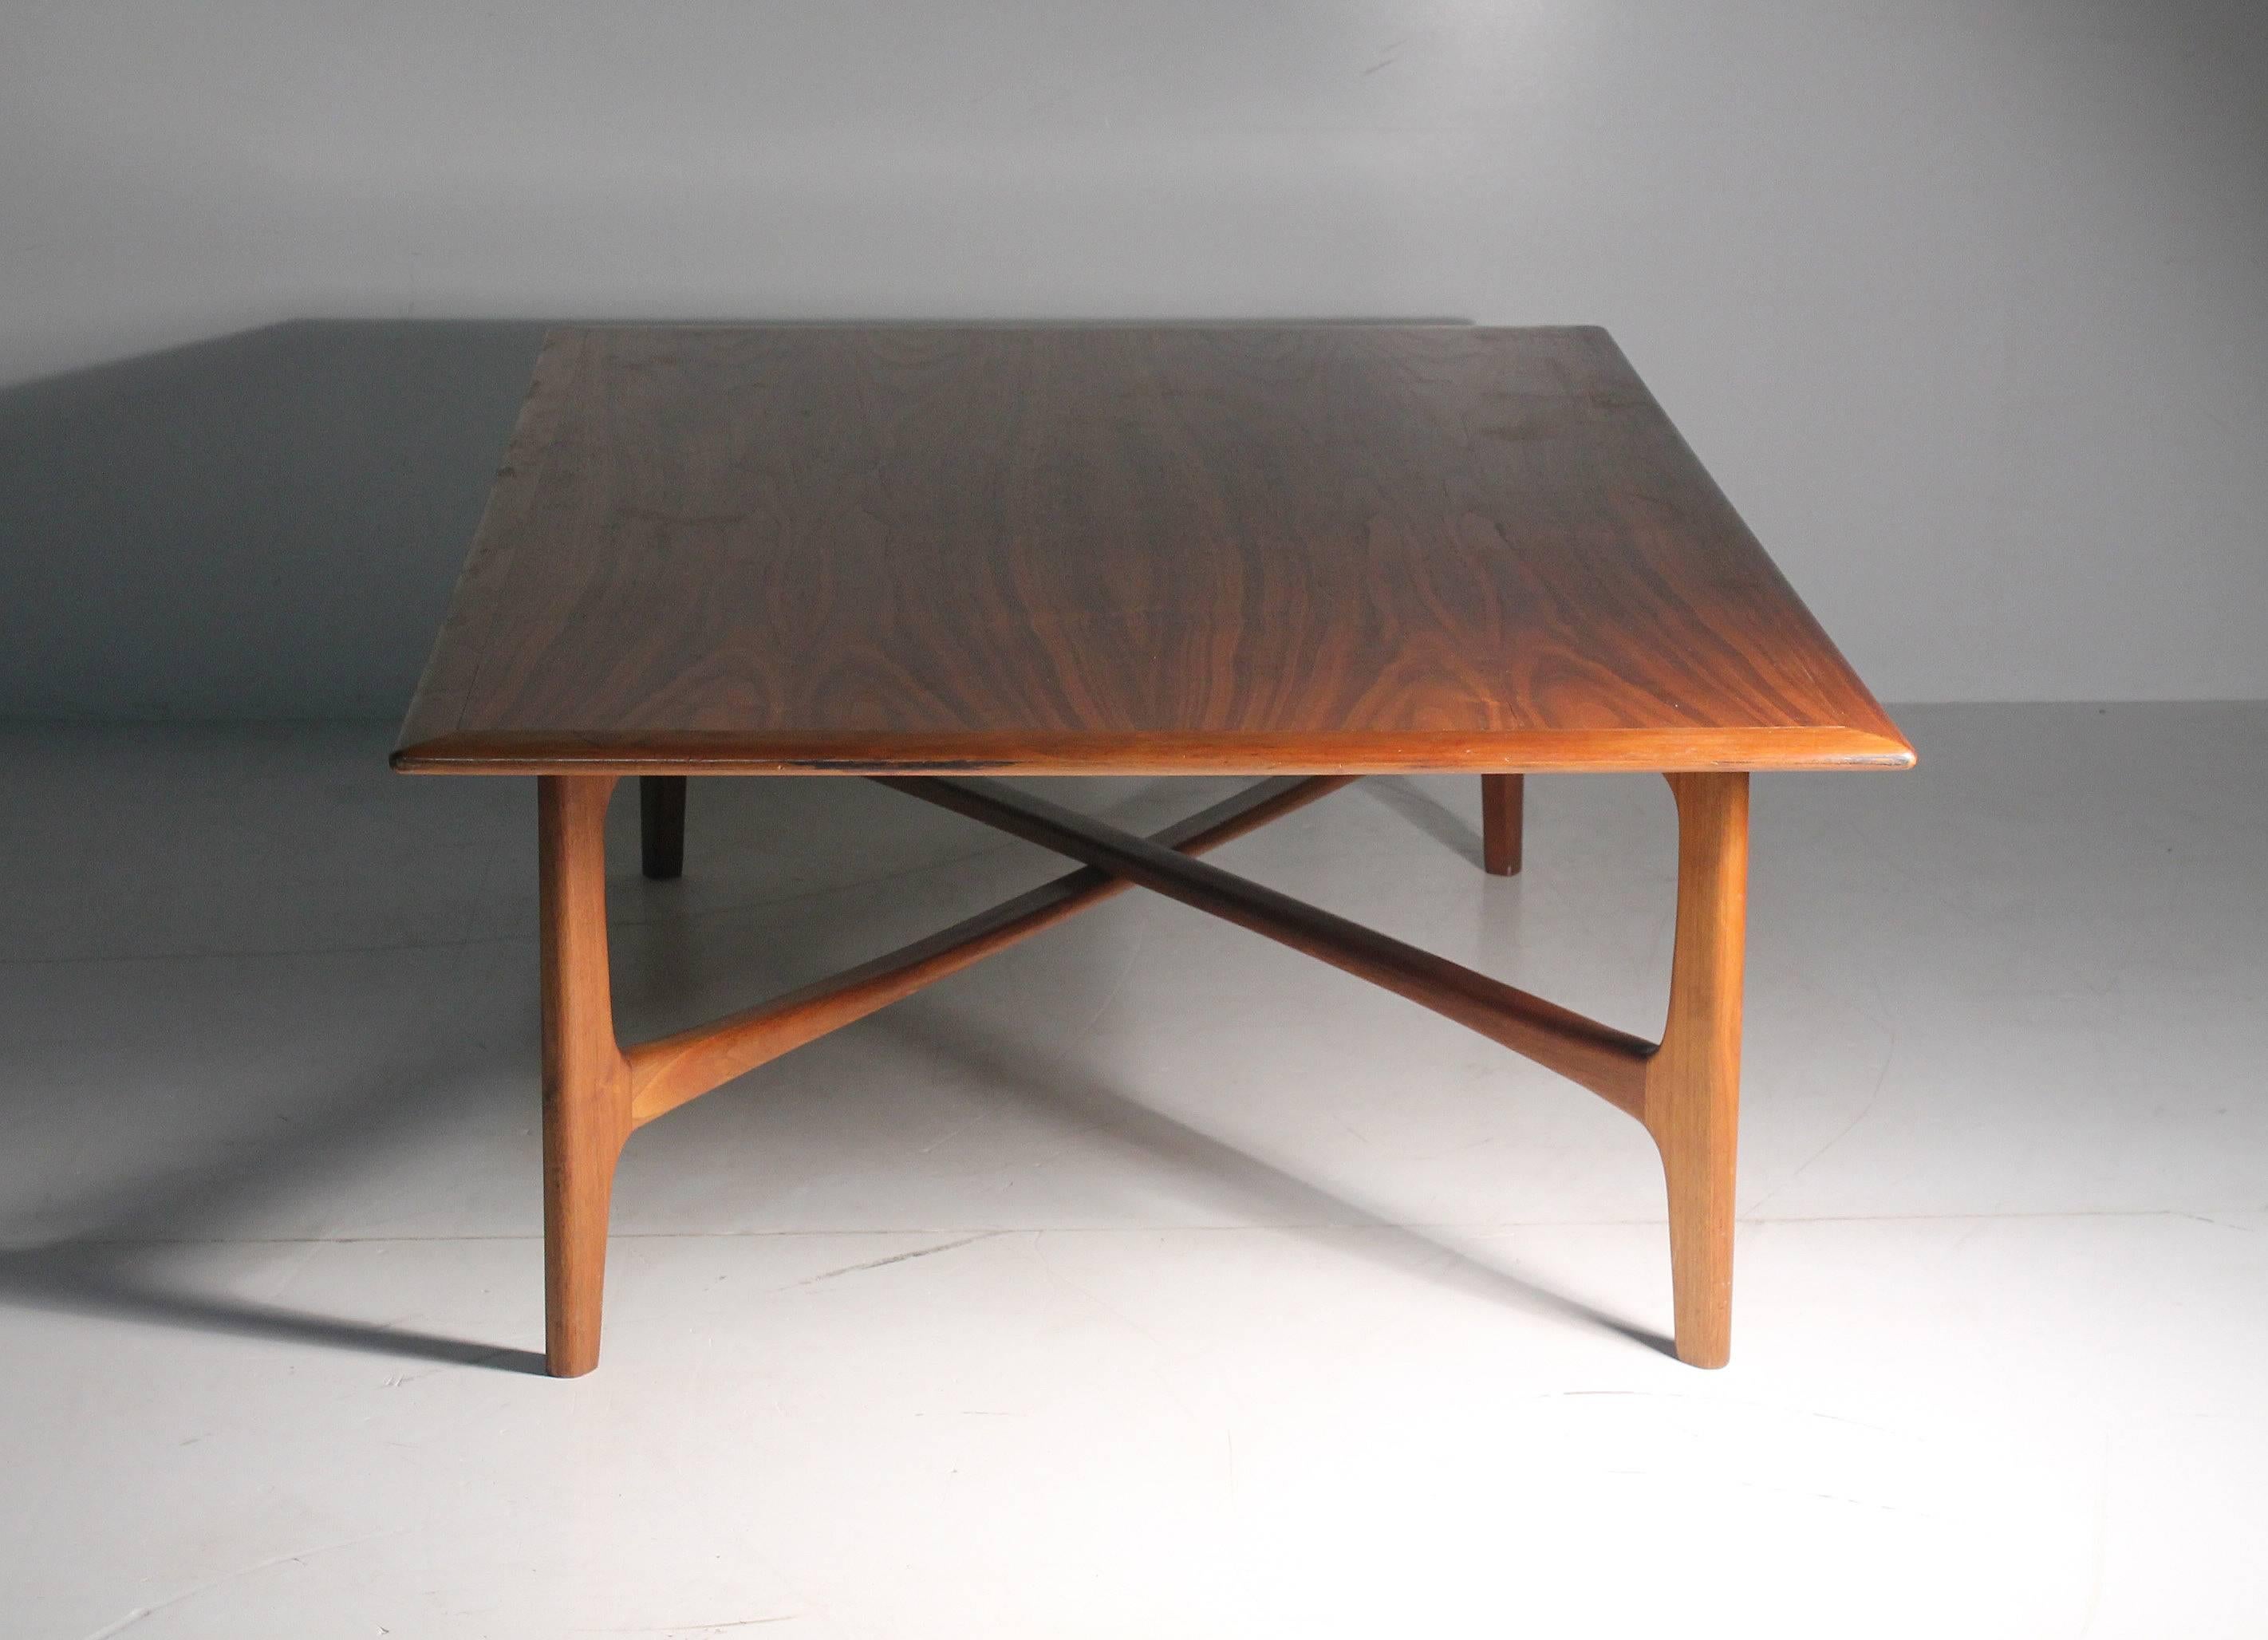 Danish Modern DUX Folke Ohlsson Coffee Table with X-Stretcher In Good Condition In Chicago, IL